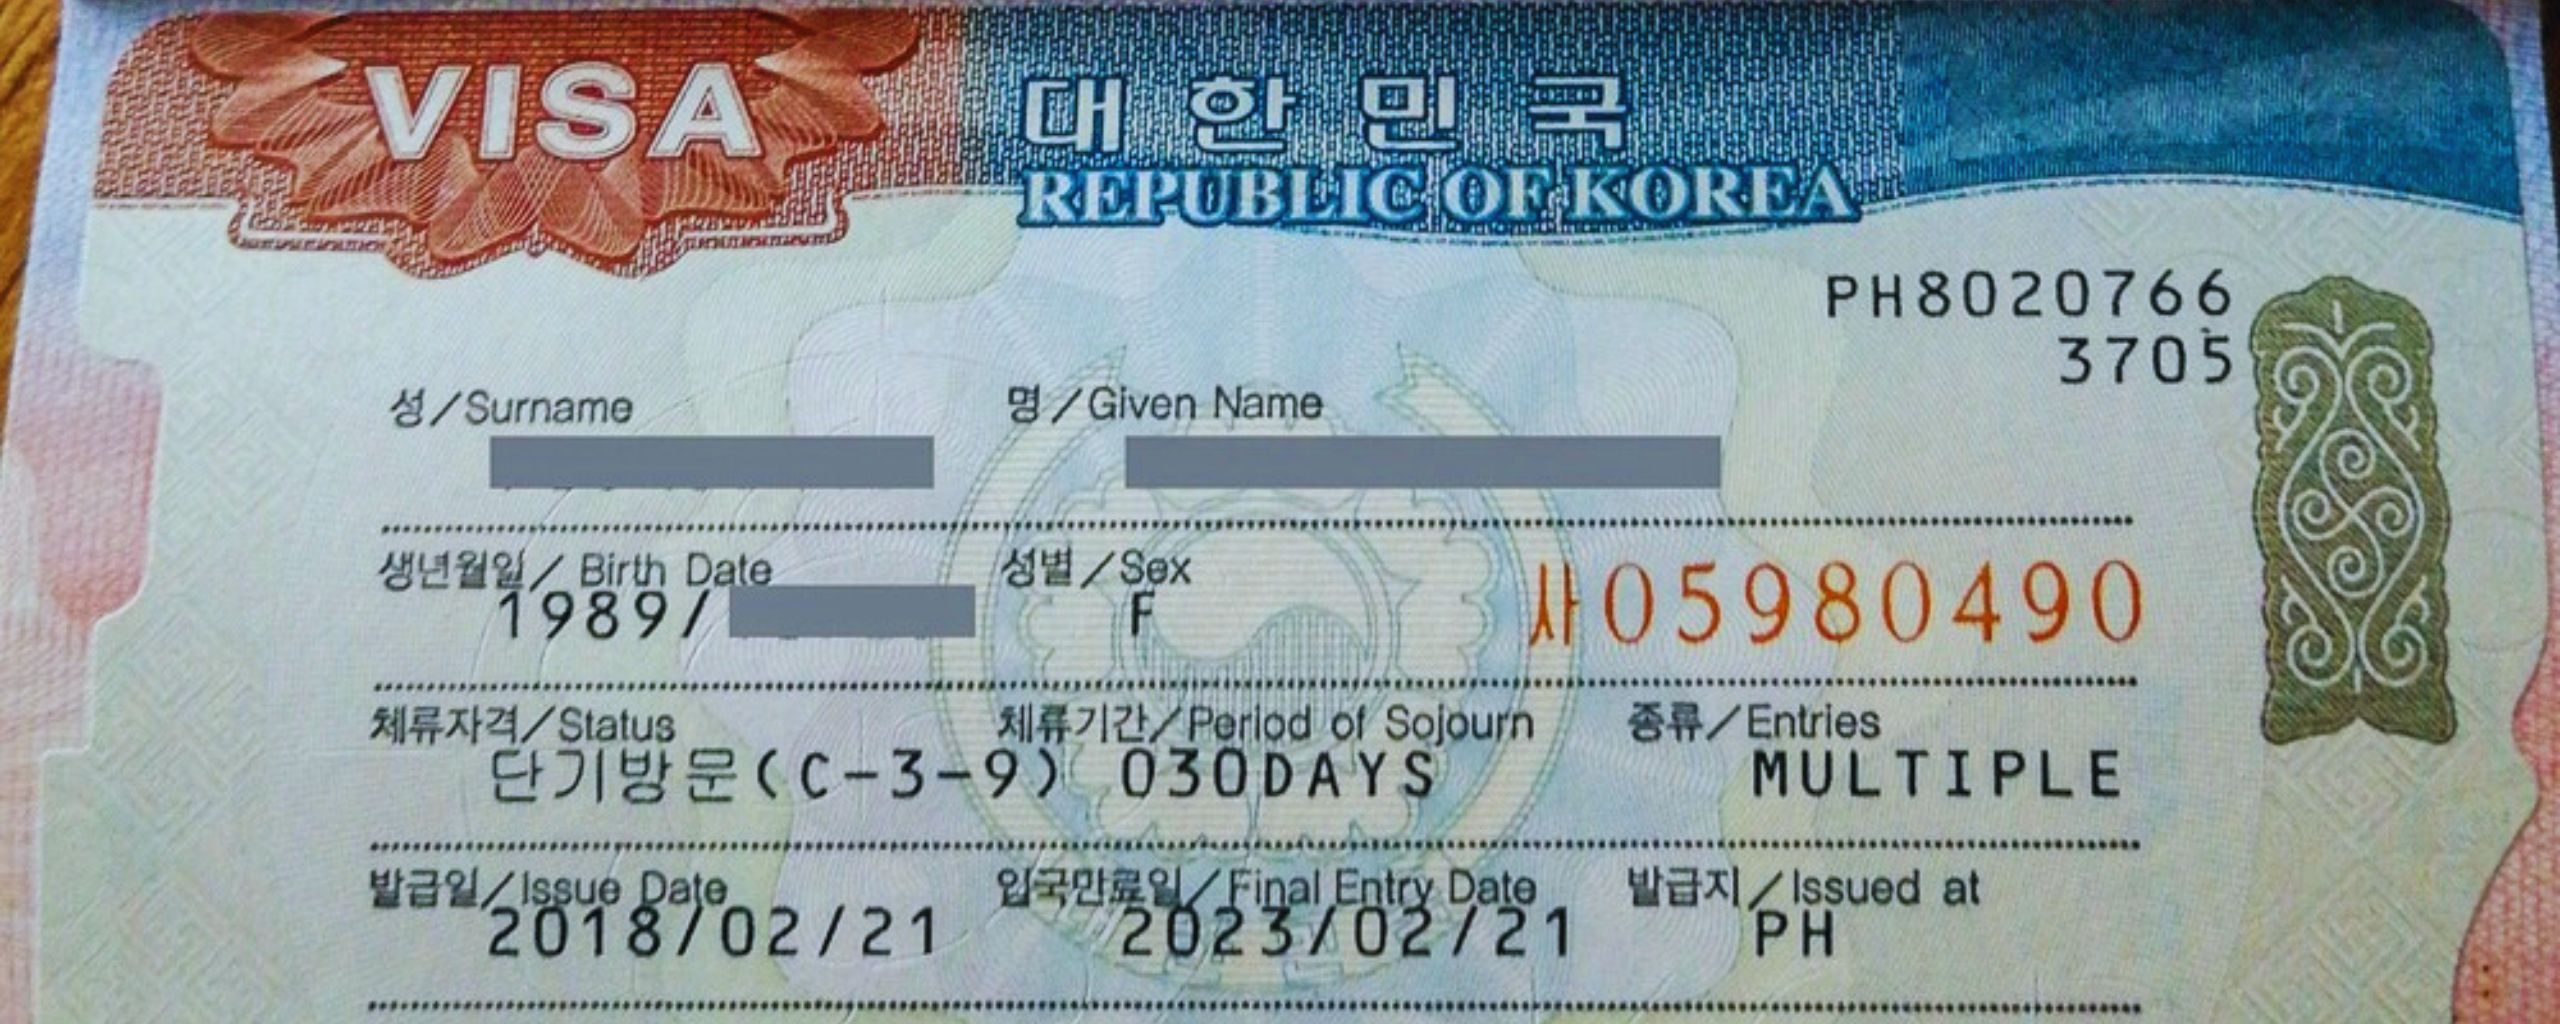 South Korea Introduces Online Visa System for Foreign Workers